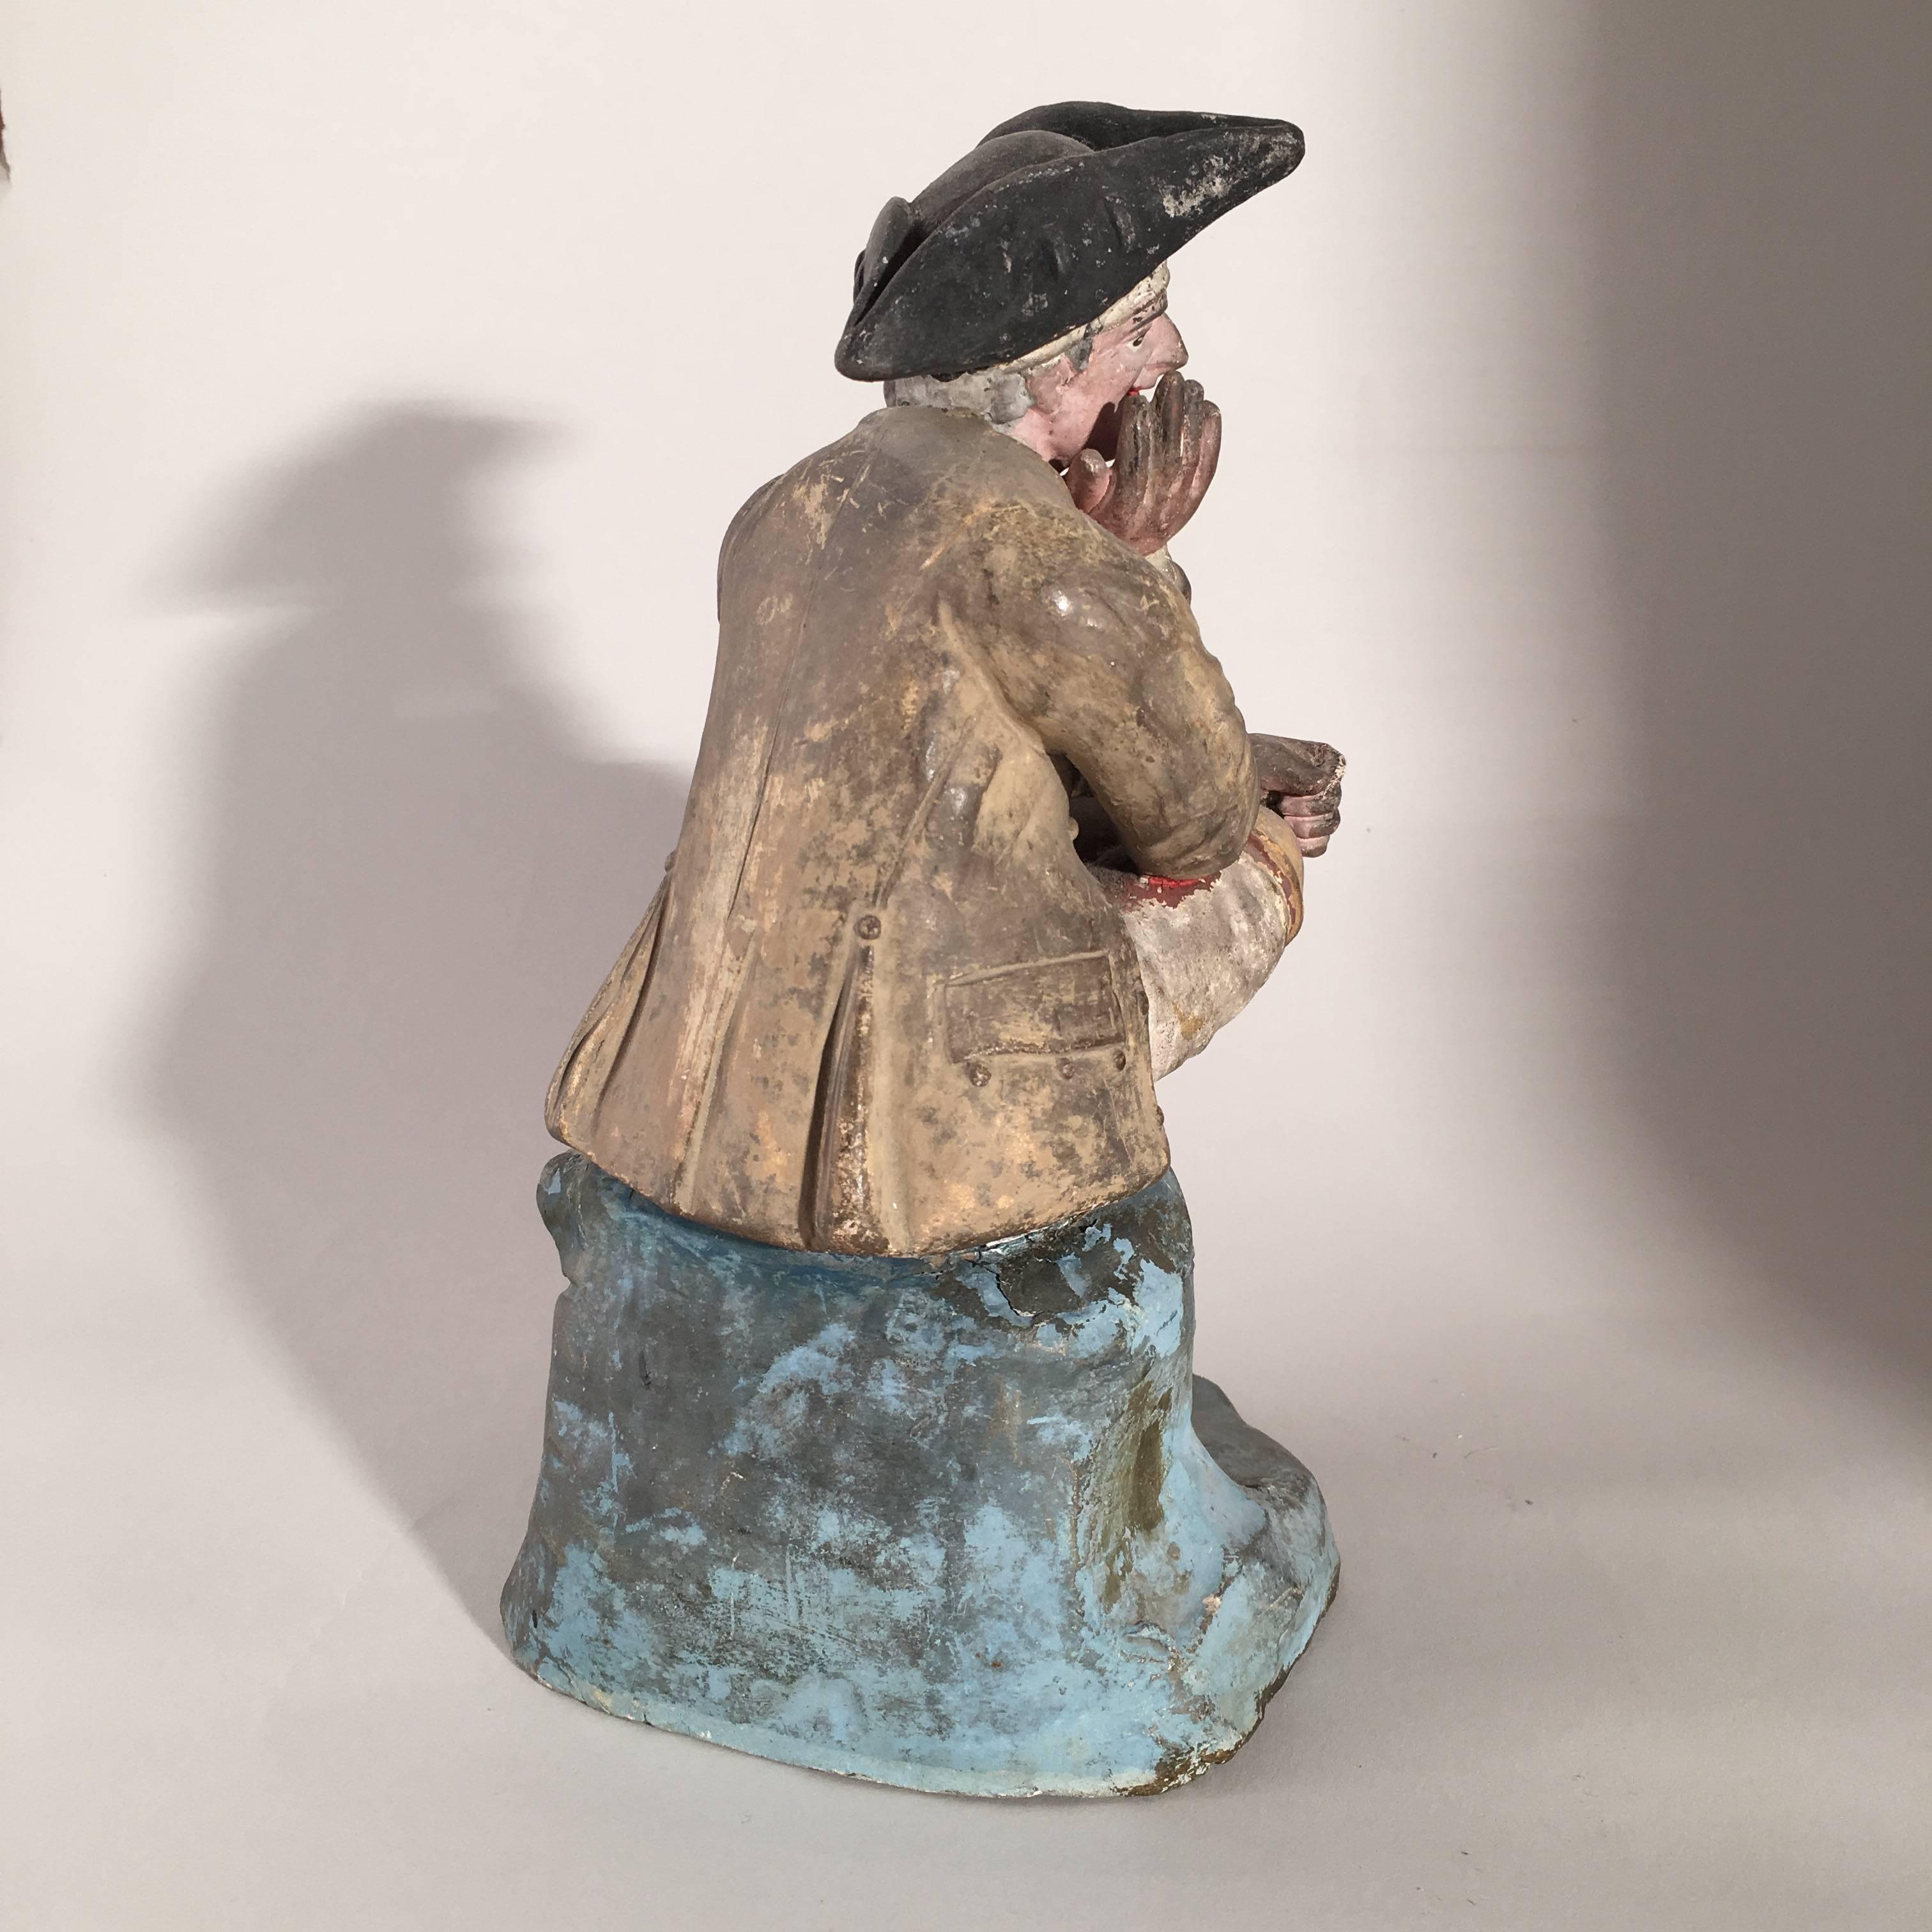 A late 18th century French Provincial figurine of a seated gardener with watering can, in period costume with tricorn hat, circa 1770, in painted terracotta. From the estate of Pierre Moulin, author of French Country style books and founder of